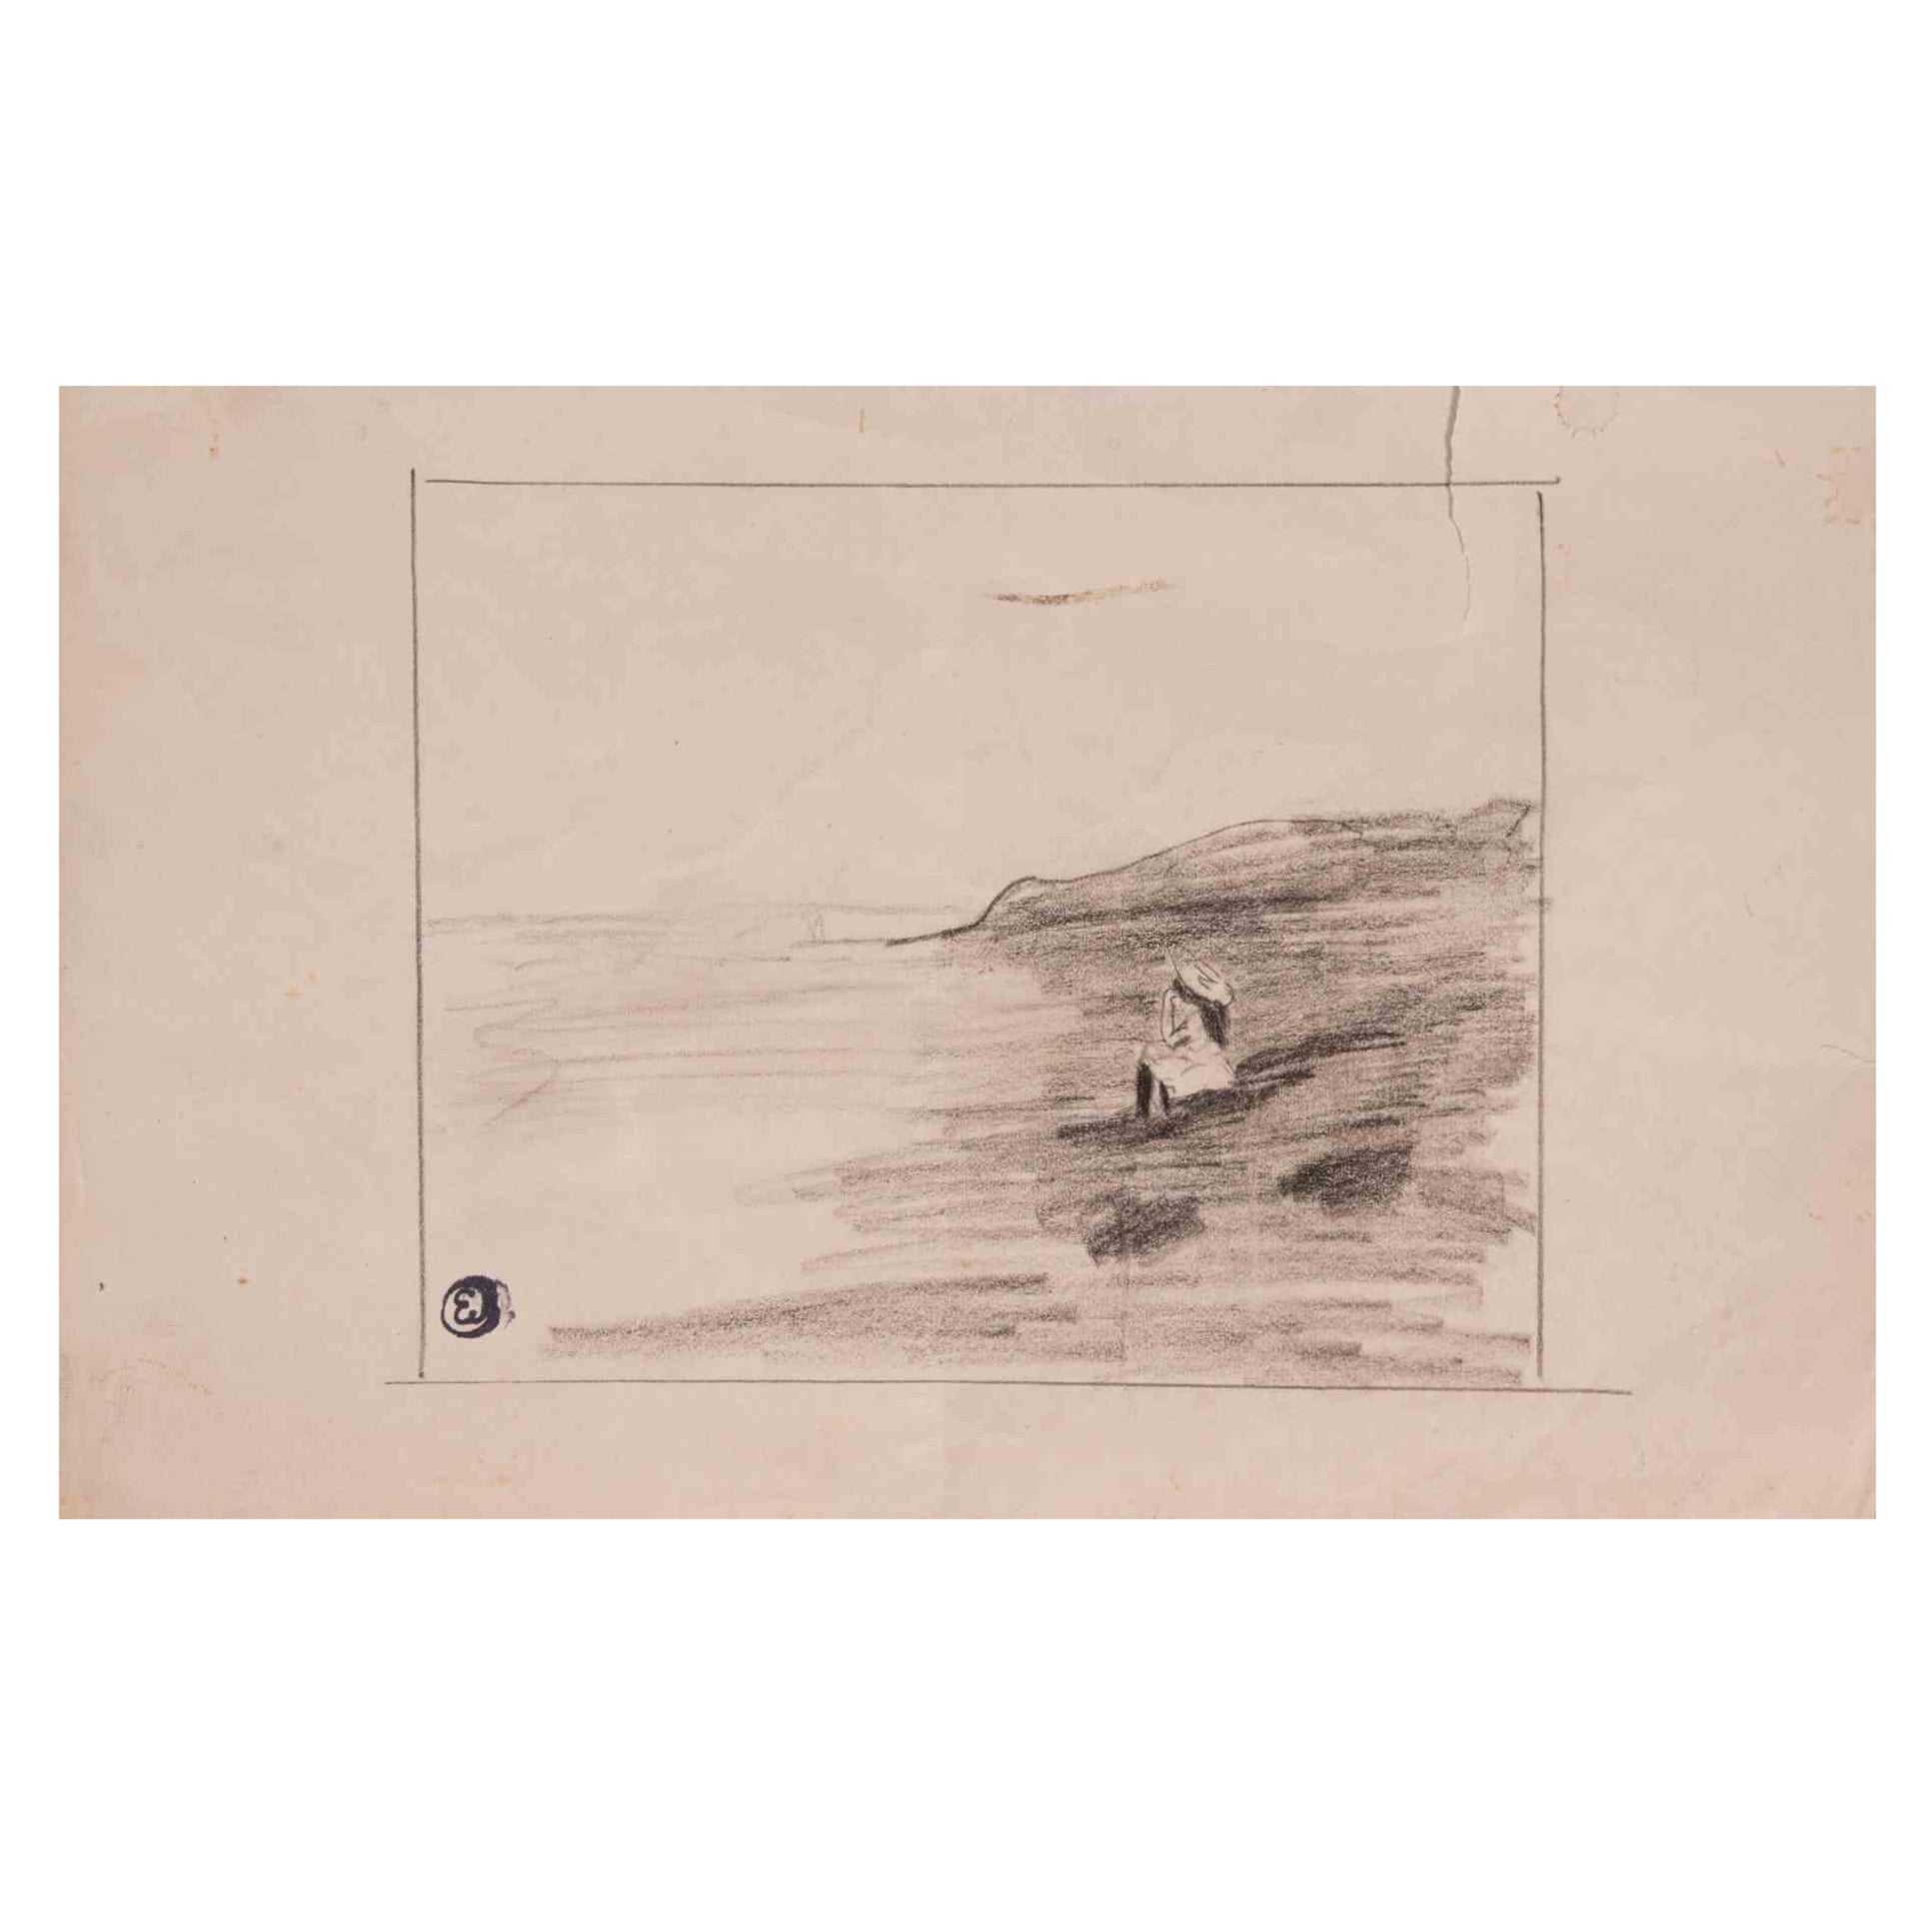 The Girl by Shore - Original Drawing by Edmond Cuisinier - Early 20th Century